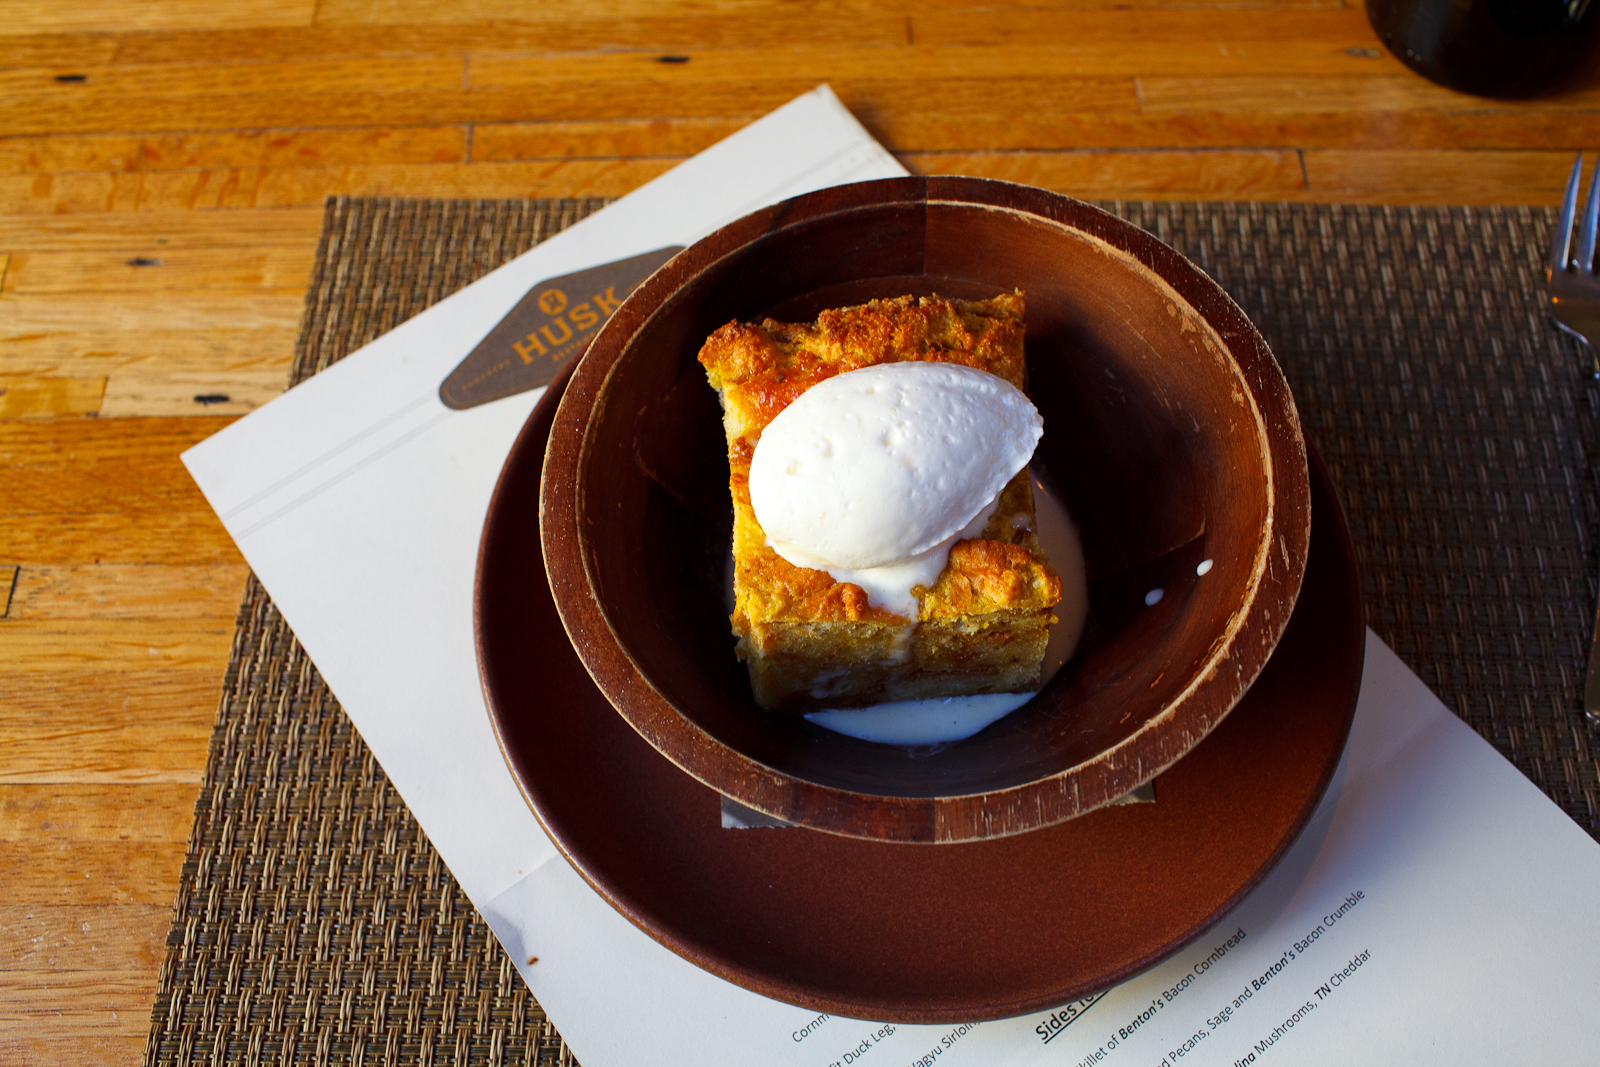 Heirloom pumpkin bread pudding, ginger anglaise ($7)